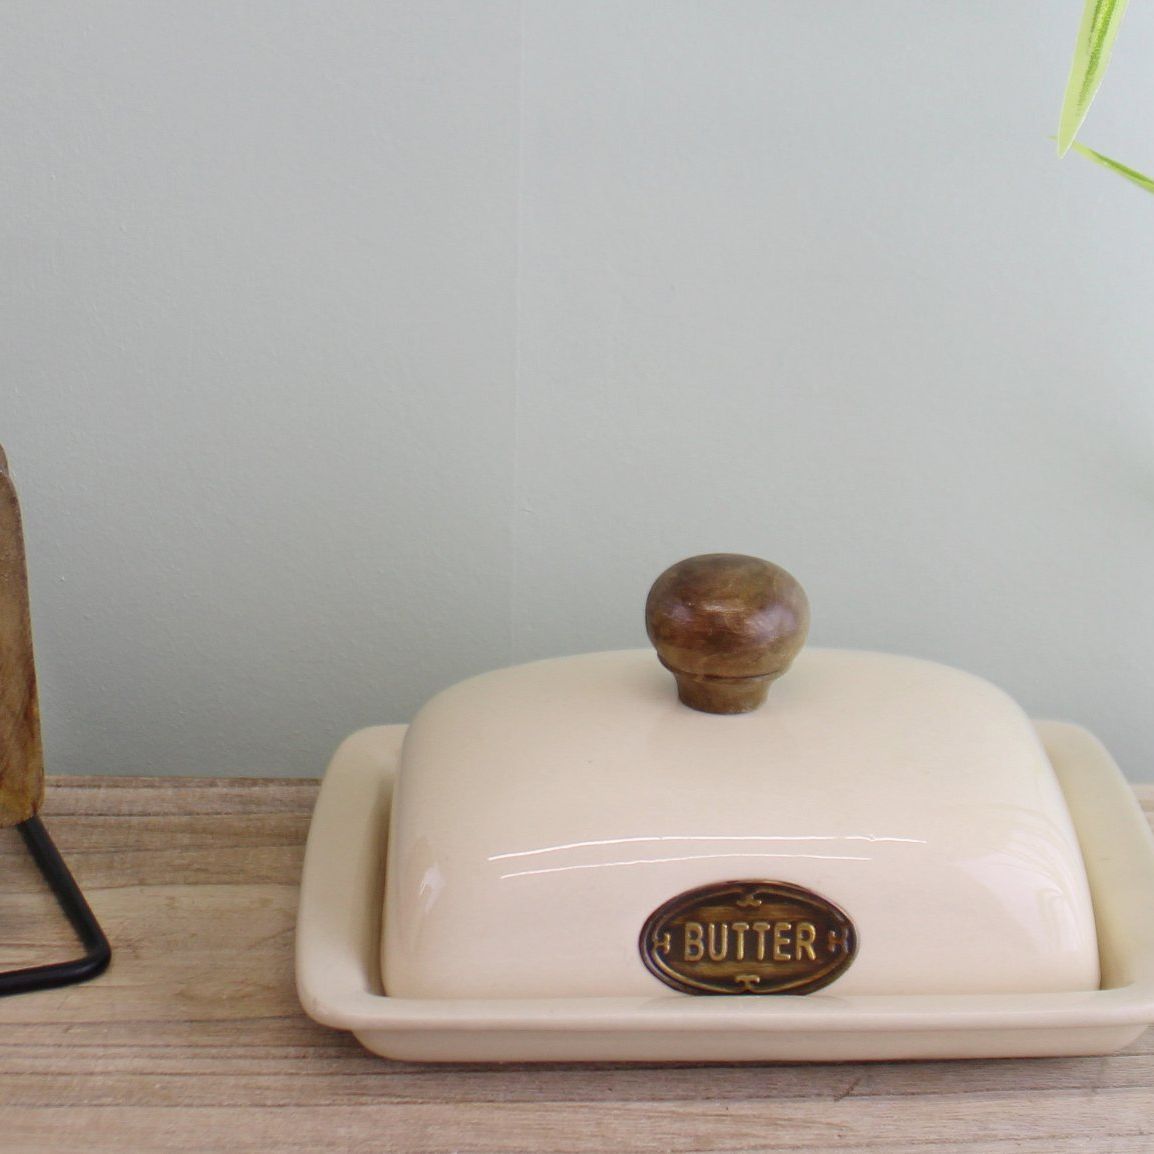 Country Cottage Cream Ceramic Butter Dish - Ashton and Finch